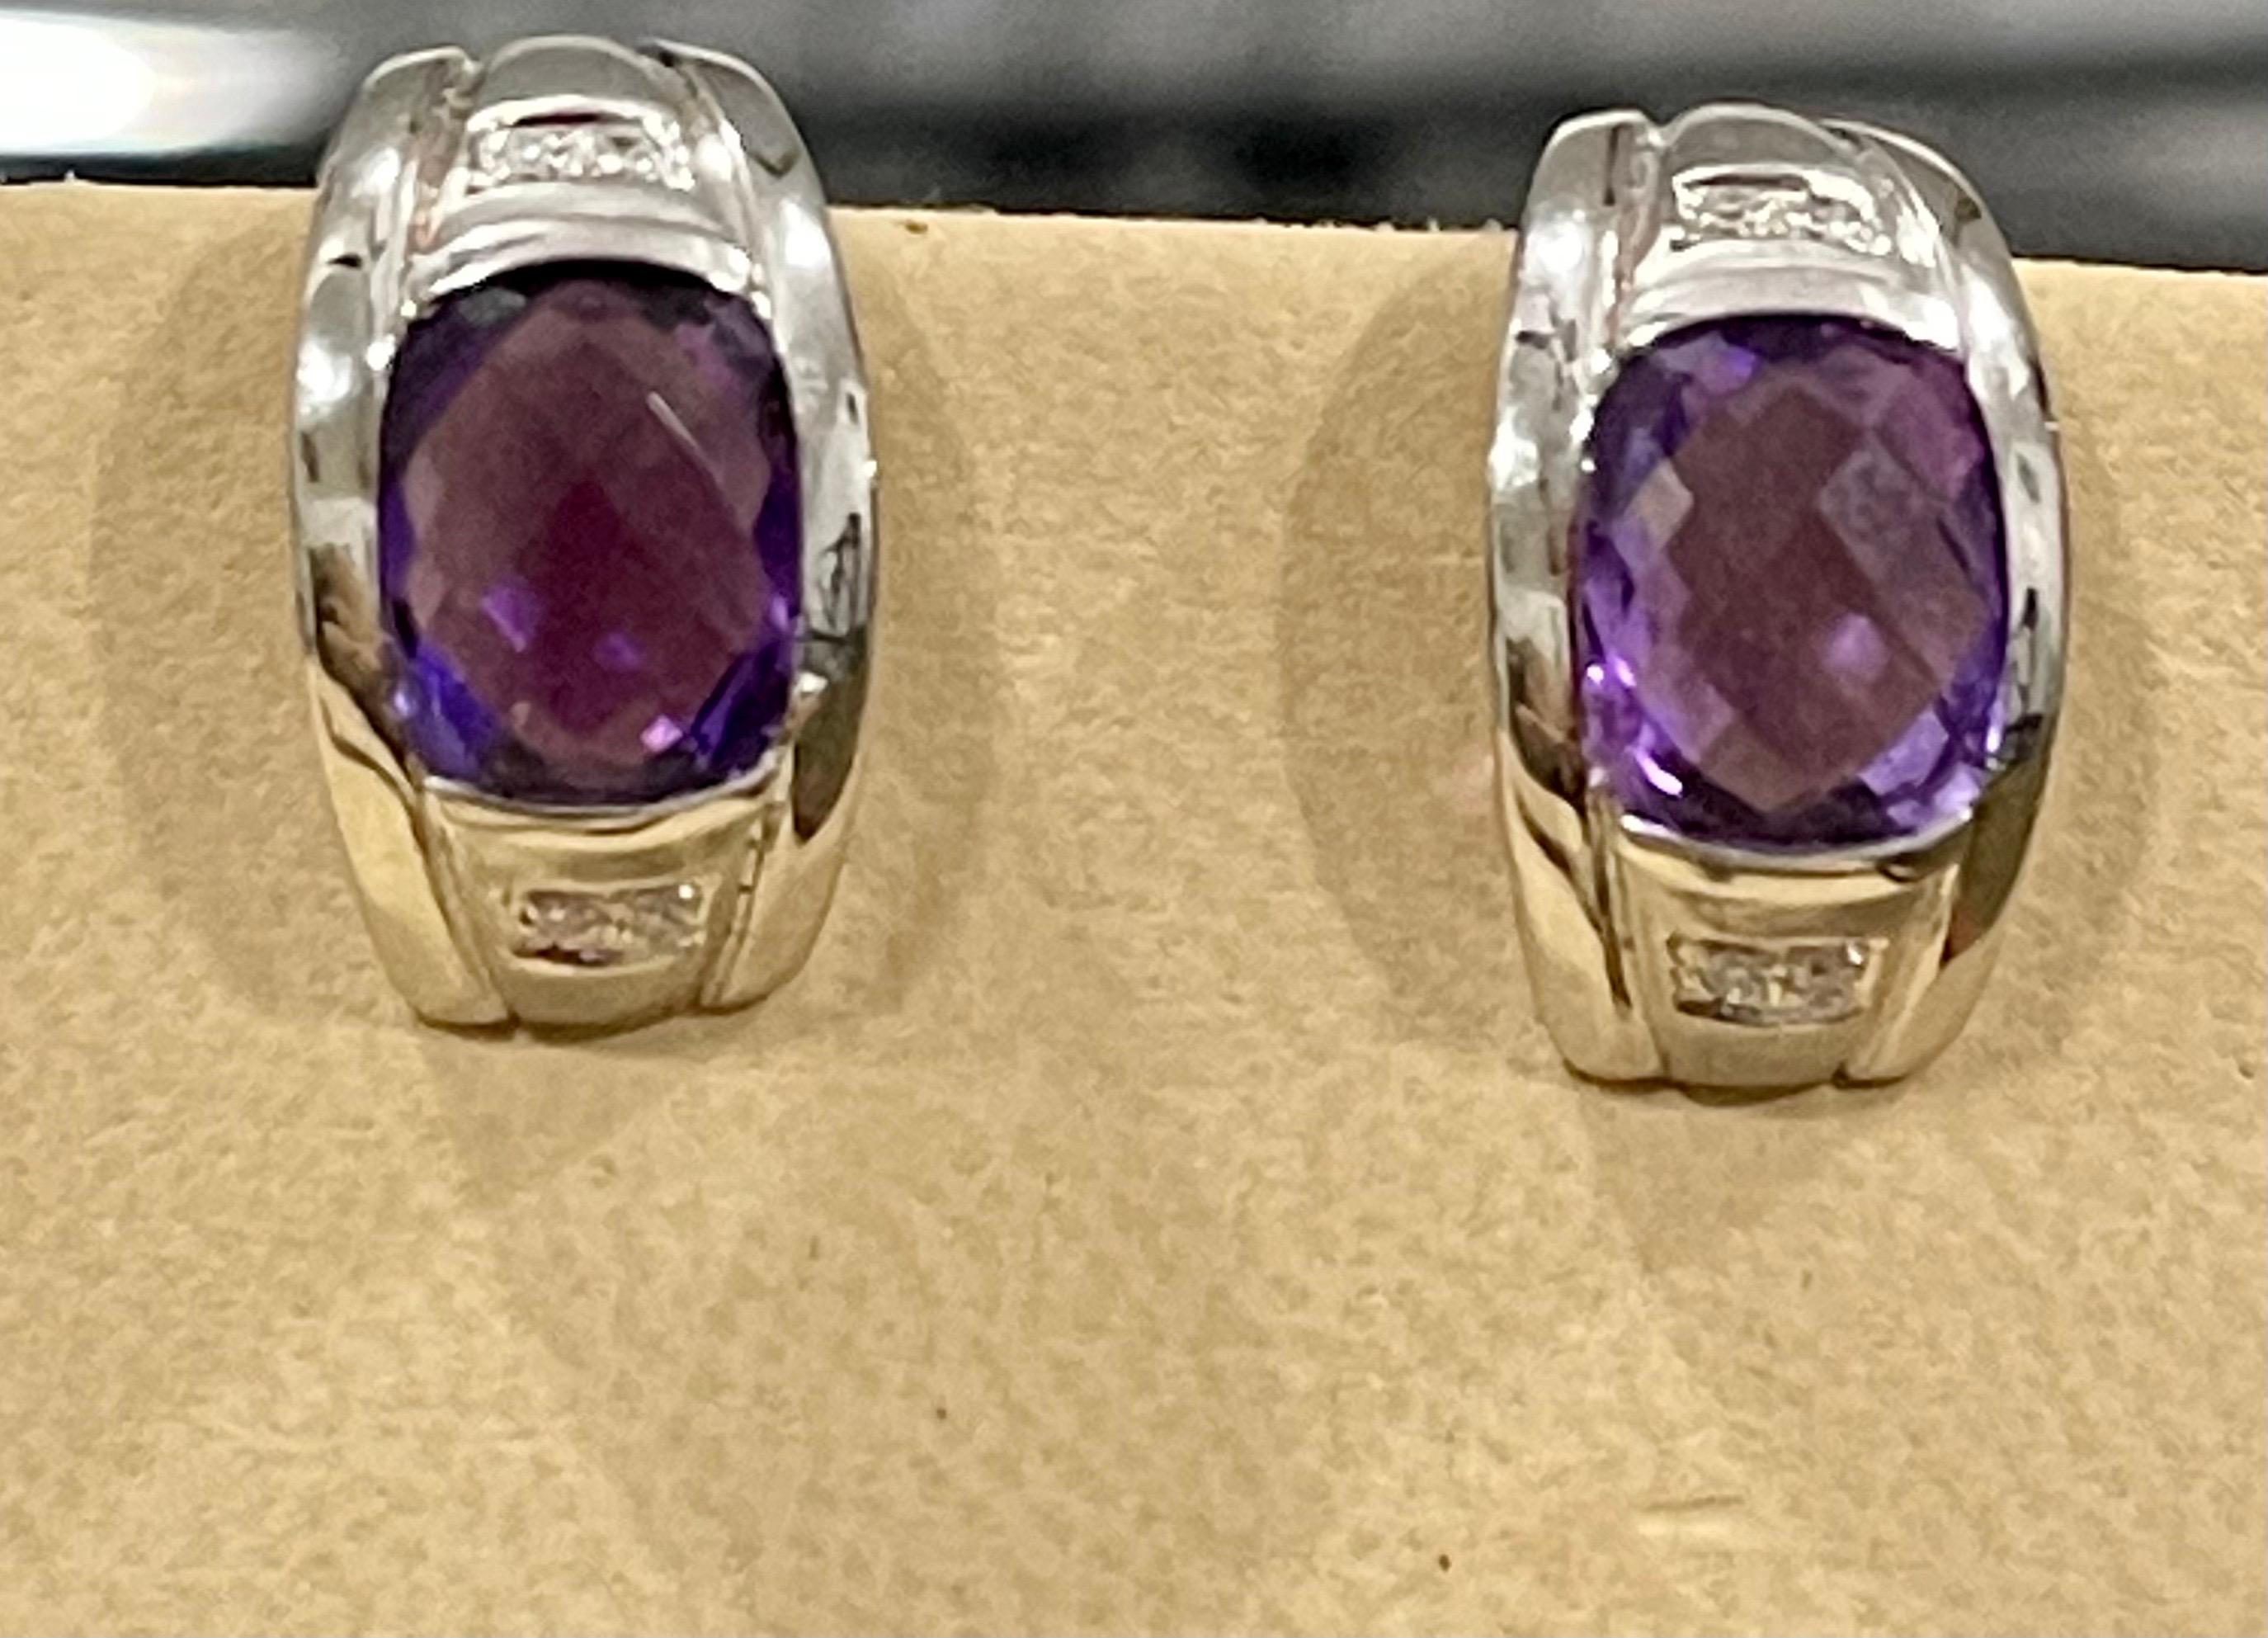 6 Carat Amethyst and Diamond 14 Karat White Gold Earrings, Omega Back
Beautiful pair of earrings  finely crafted in  14 Karat  solid White gold.
Very desirable color and quality.
perfect pair made in 14 Karat White  gold
total weight 8.3 